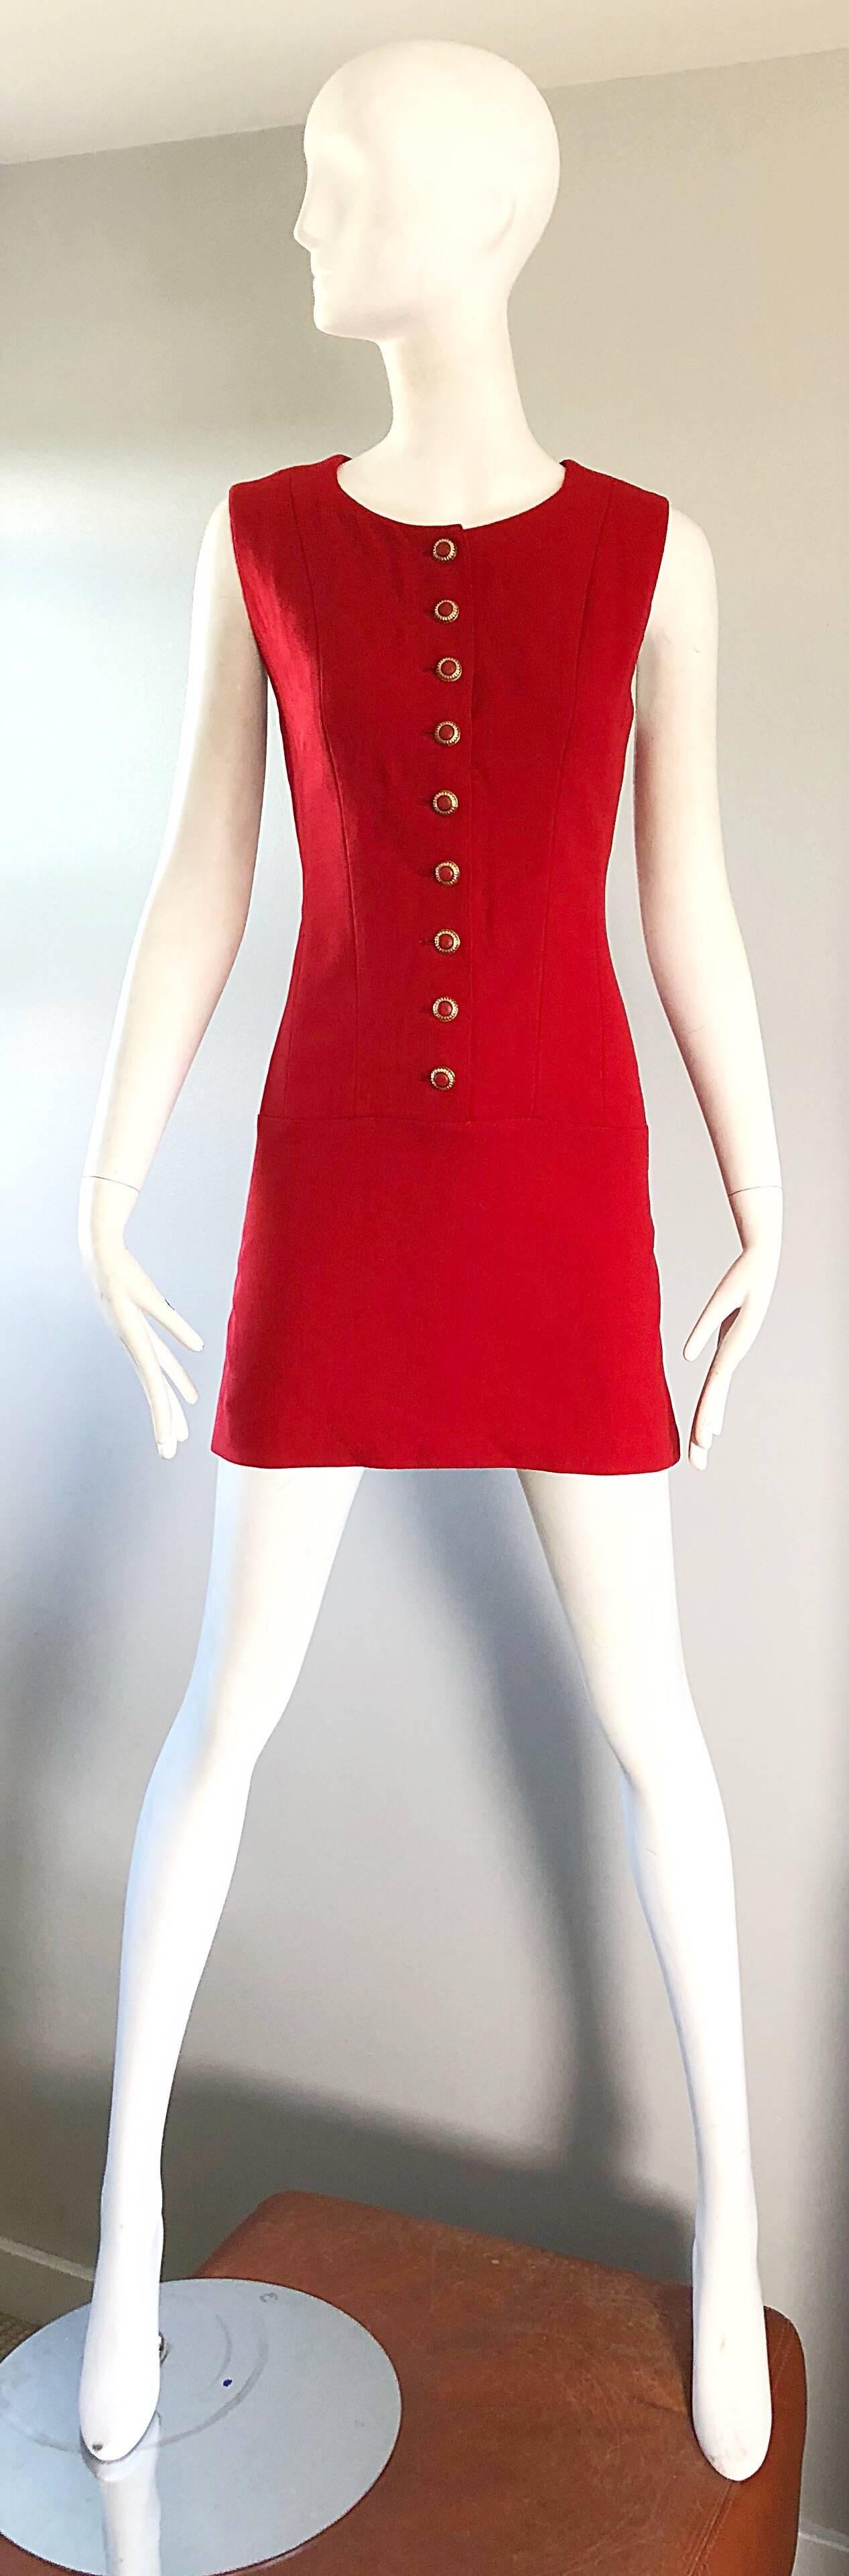 Chic 90s does 60s KARL LAGERFELD lipstick red virgin wool mod mini shift dress! Features soft virgin wool that is completely lined. Red and gold buttons up the front, with hidden zipper up the back and hook-and-eye closure. 1960s shift style.